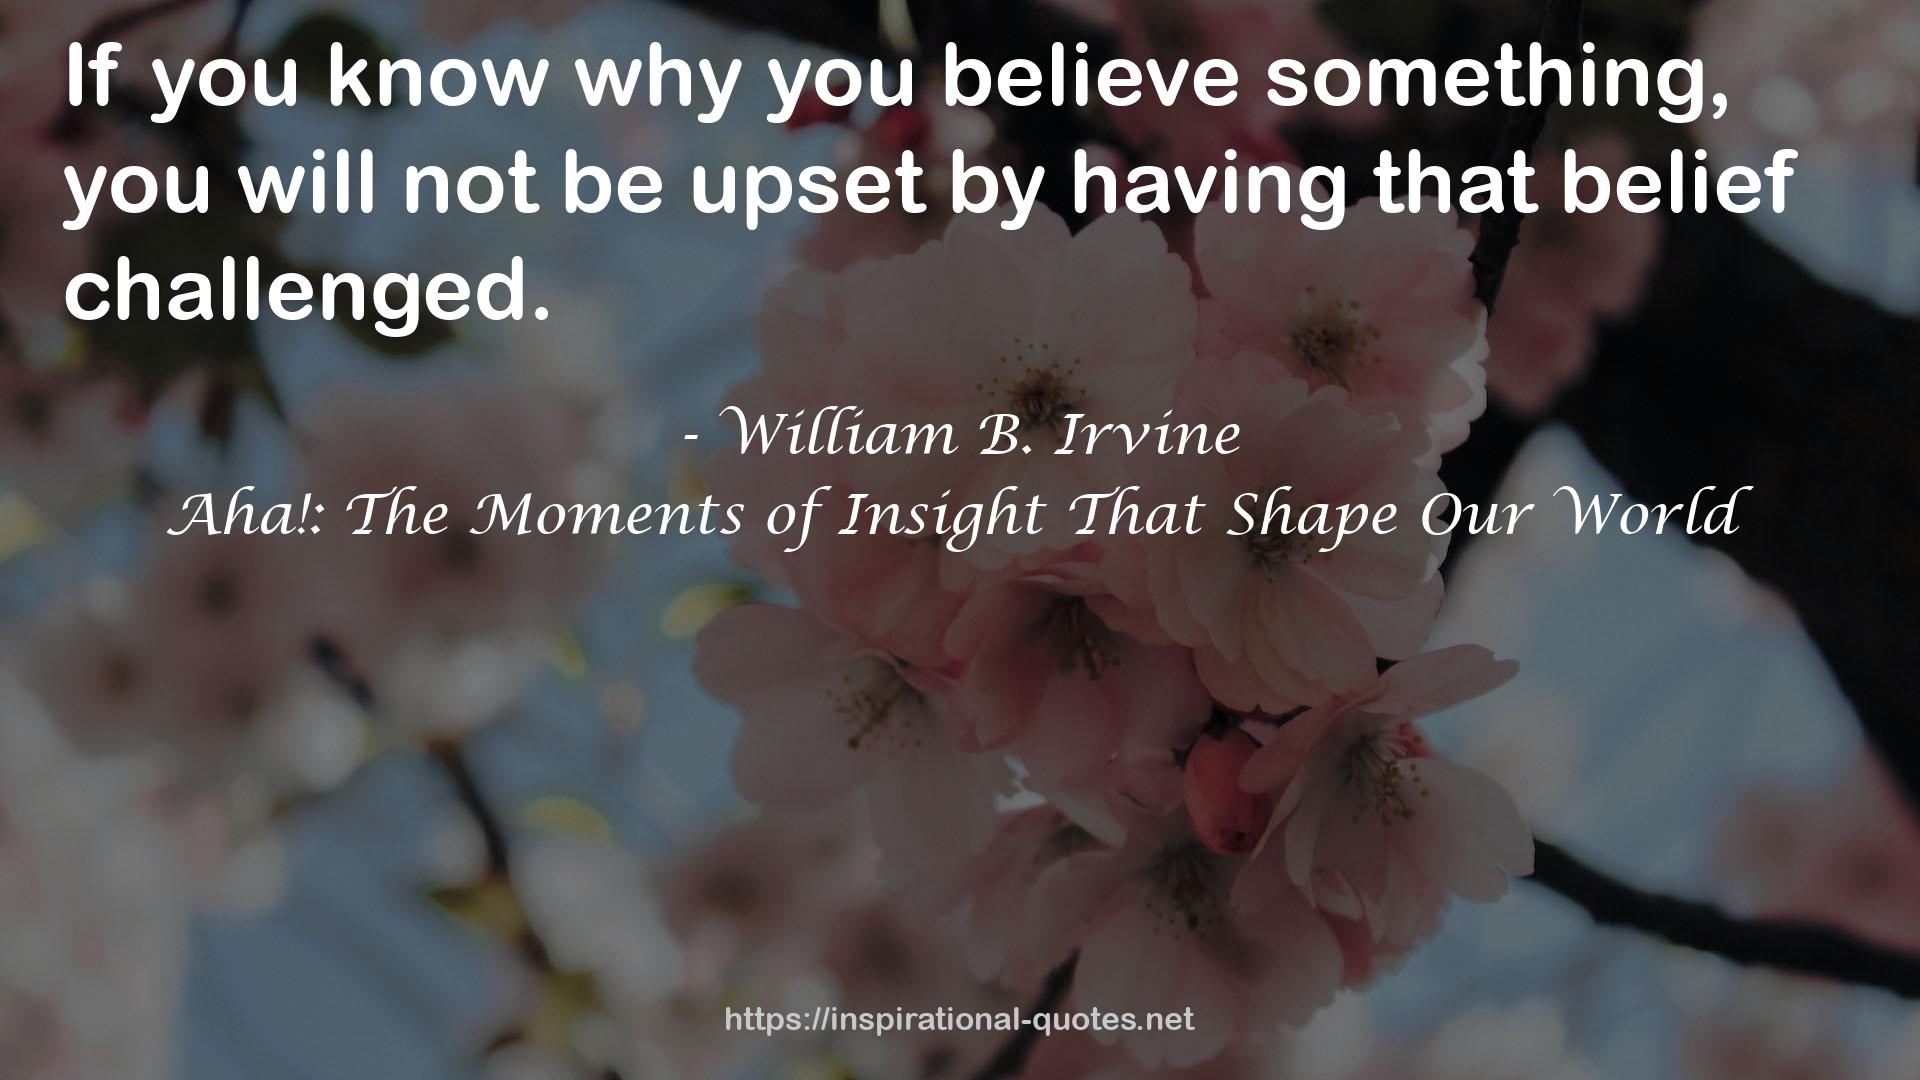 Aha!: The Moments of Insight That Shape Our World QUOTES